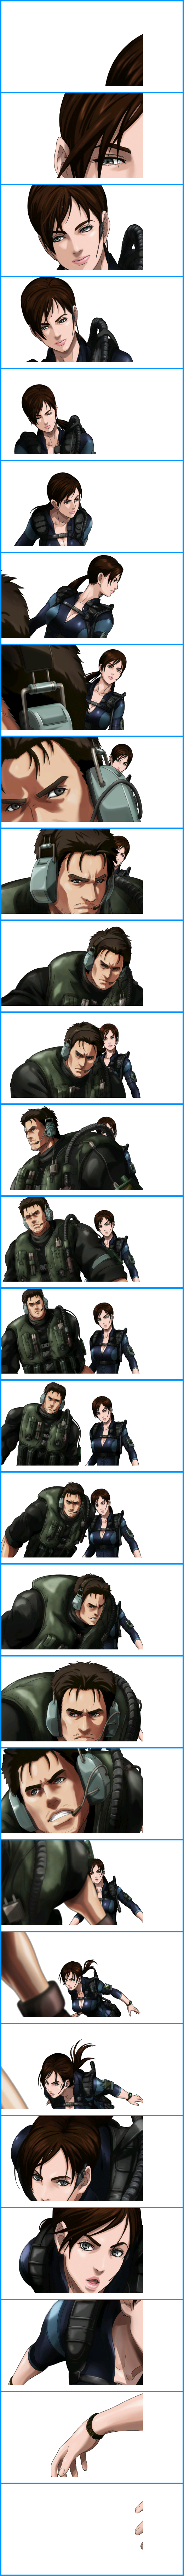 Project X Zone 2 - Chris Redfield and Jill Valentine